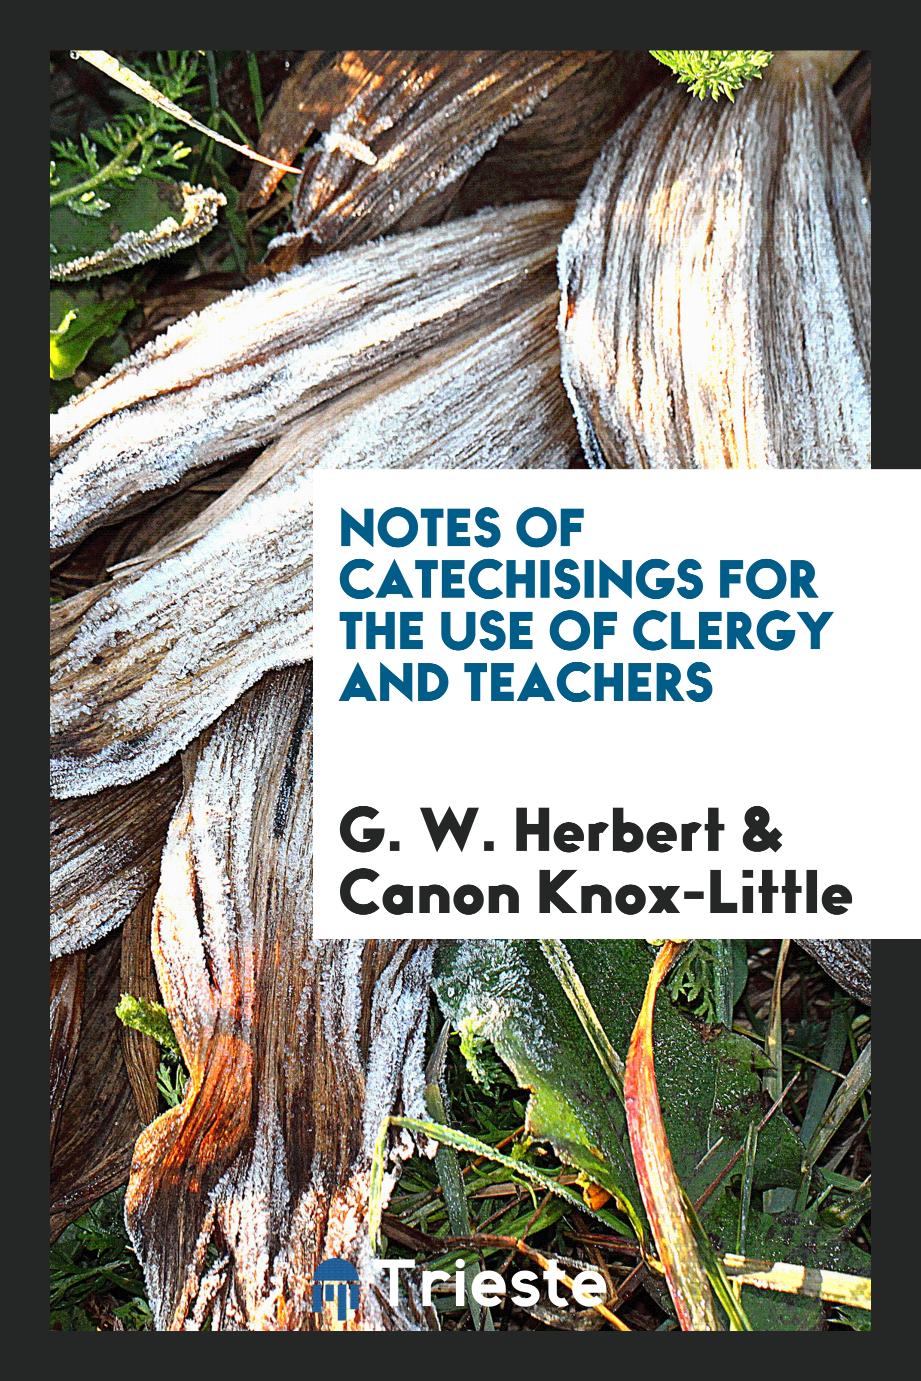 Notes of Catechisings for the Use of Clergy and Teachers